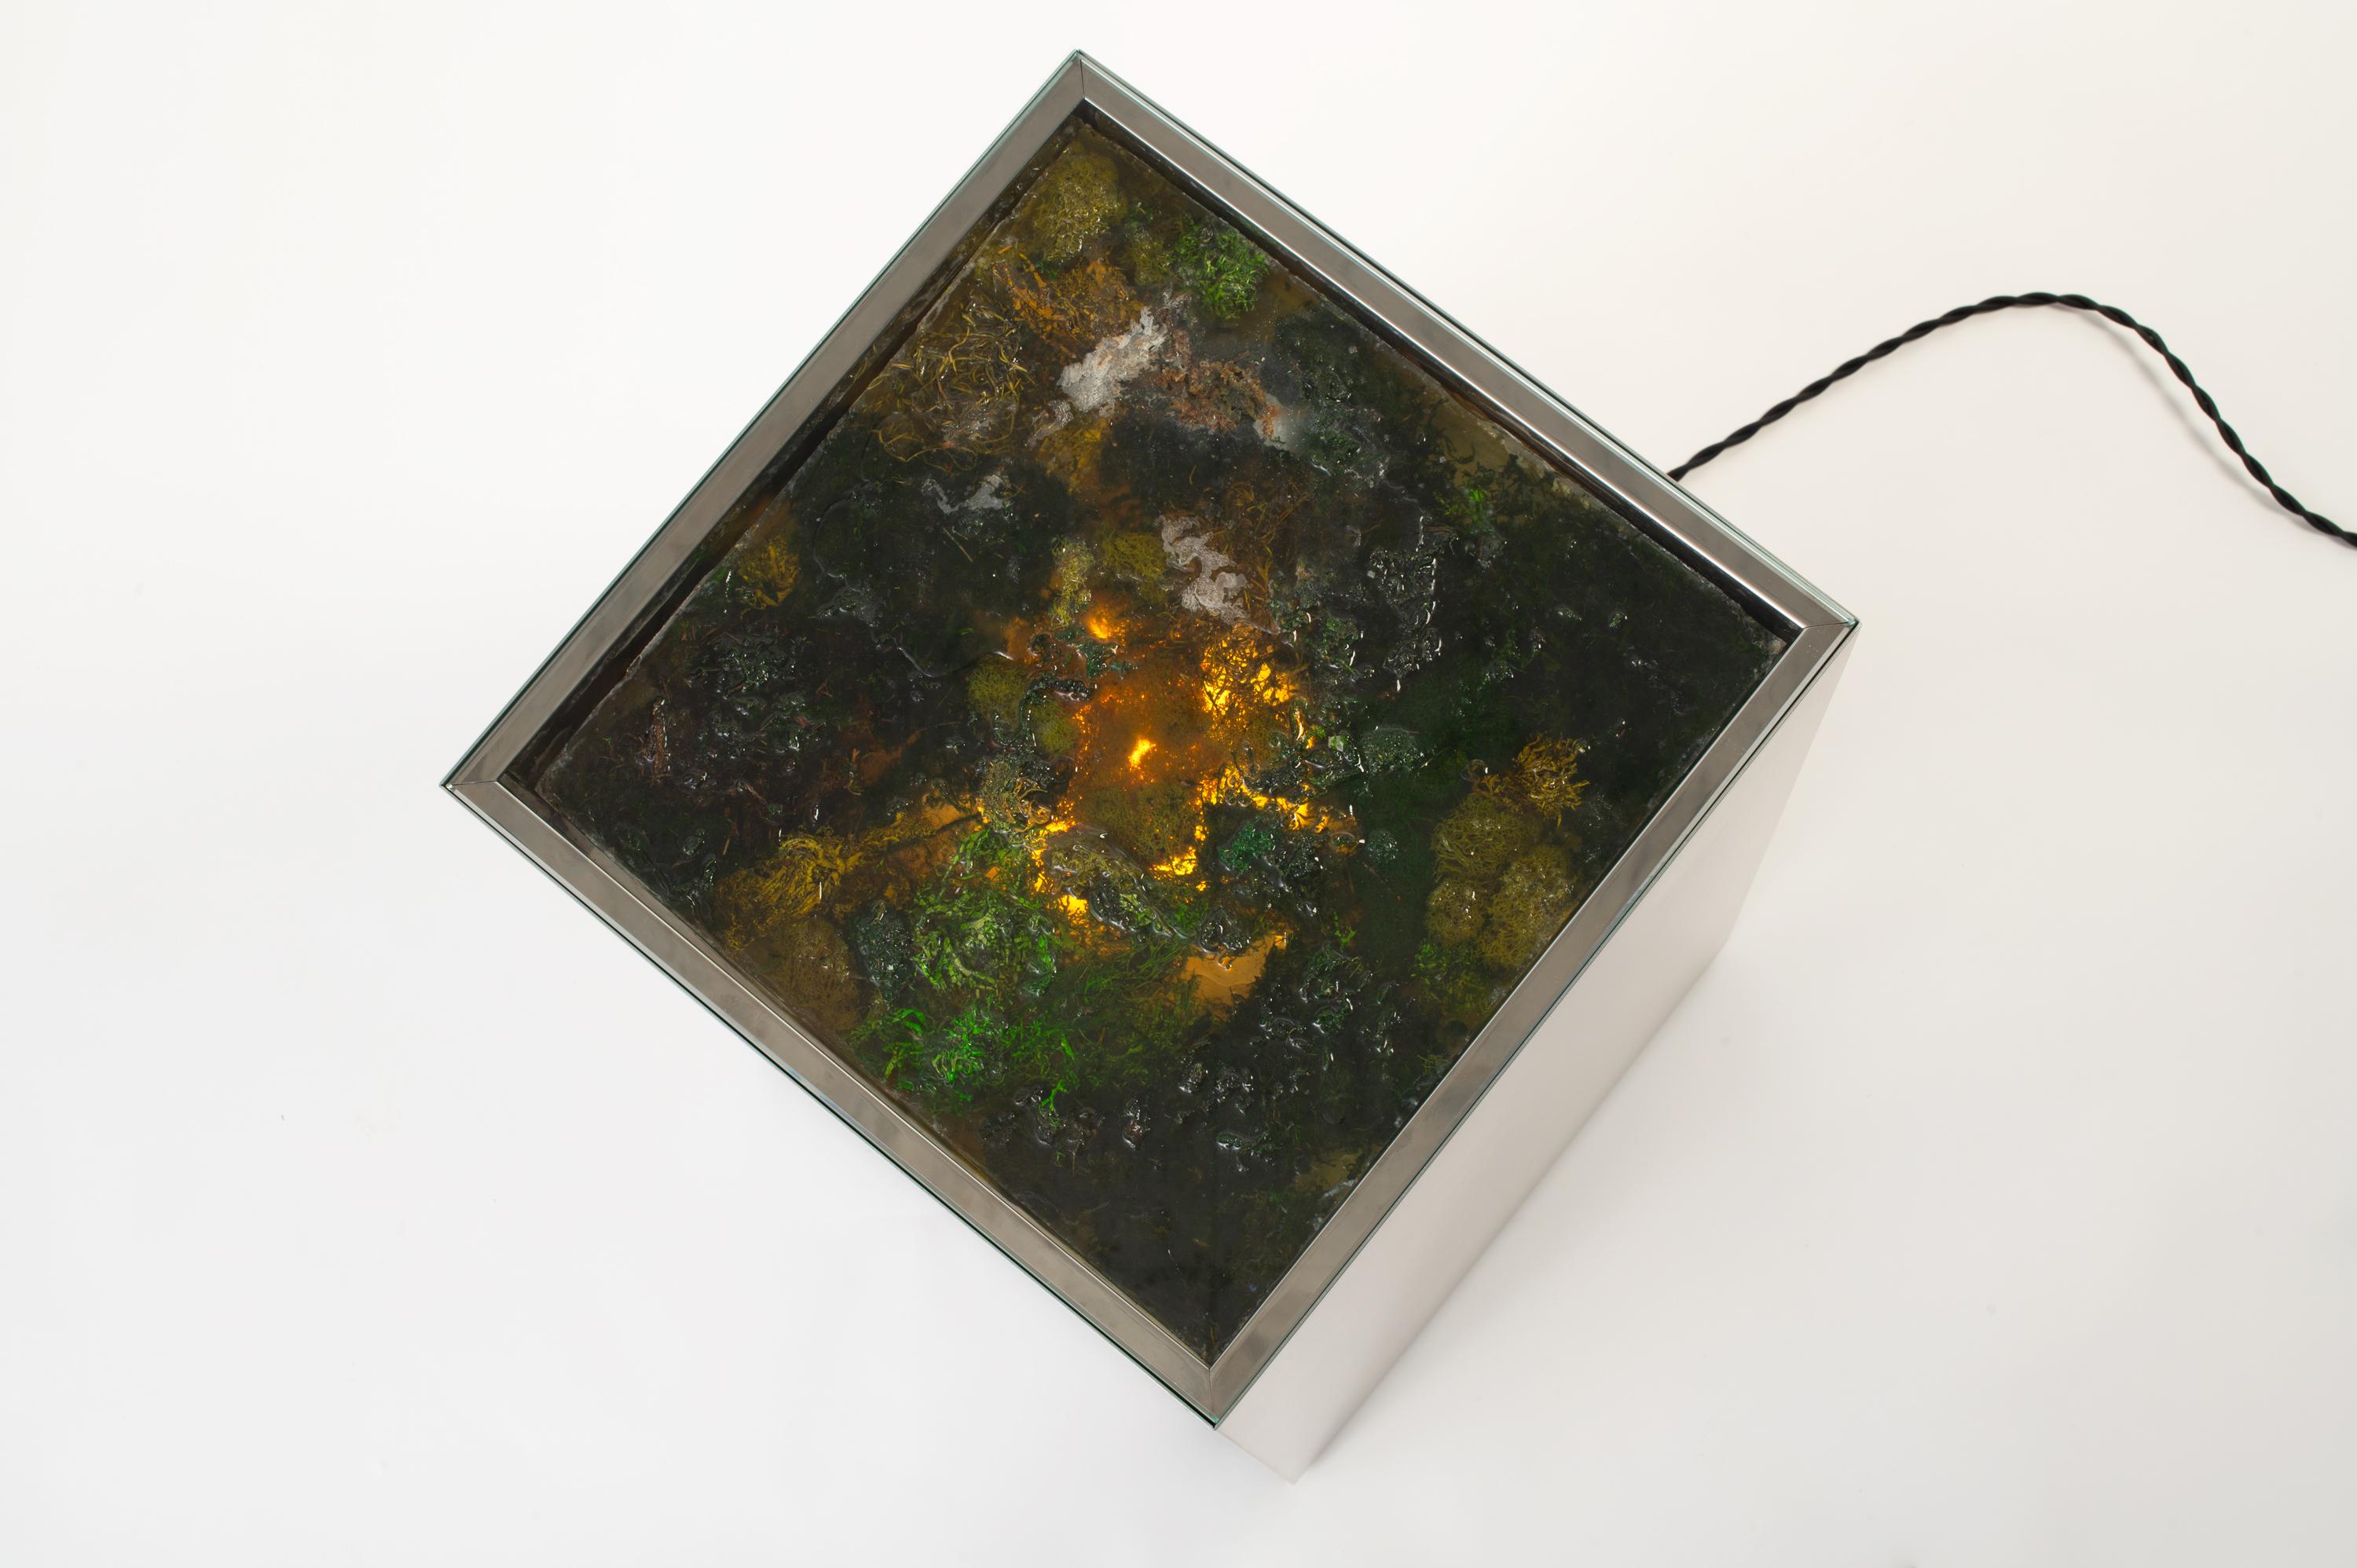 The Bryophyte Pedestal table takes form in a satin-rubbed stainless steel monolith. From above, the rectangular prism reveals an ecosystem of mosses suspended in resin. Dimmable LEDs illuminate the lichen from beneath. A reflective cavity and